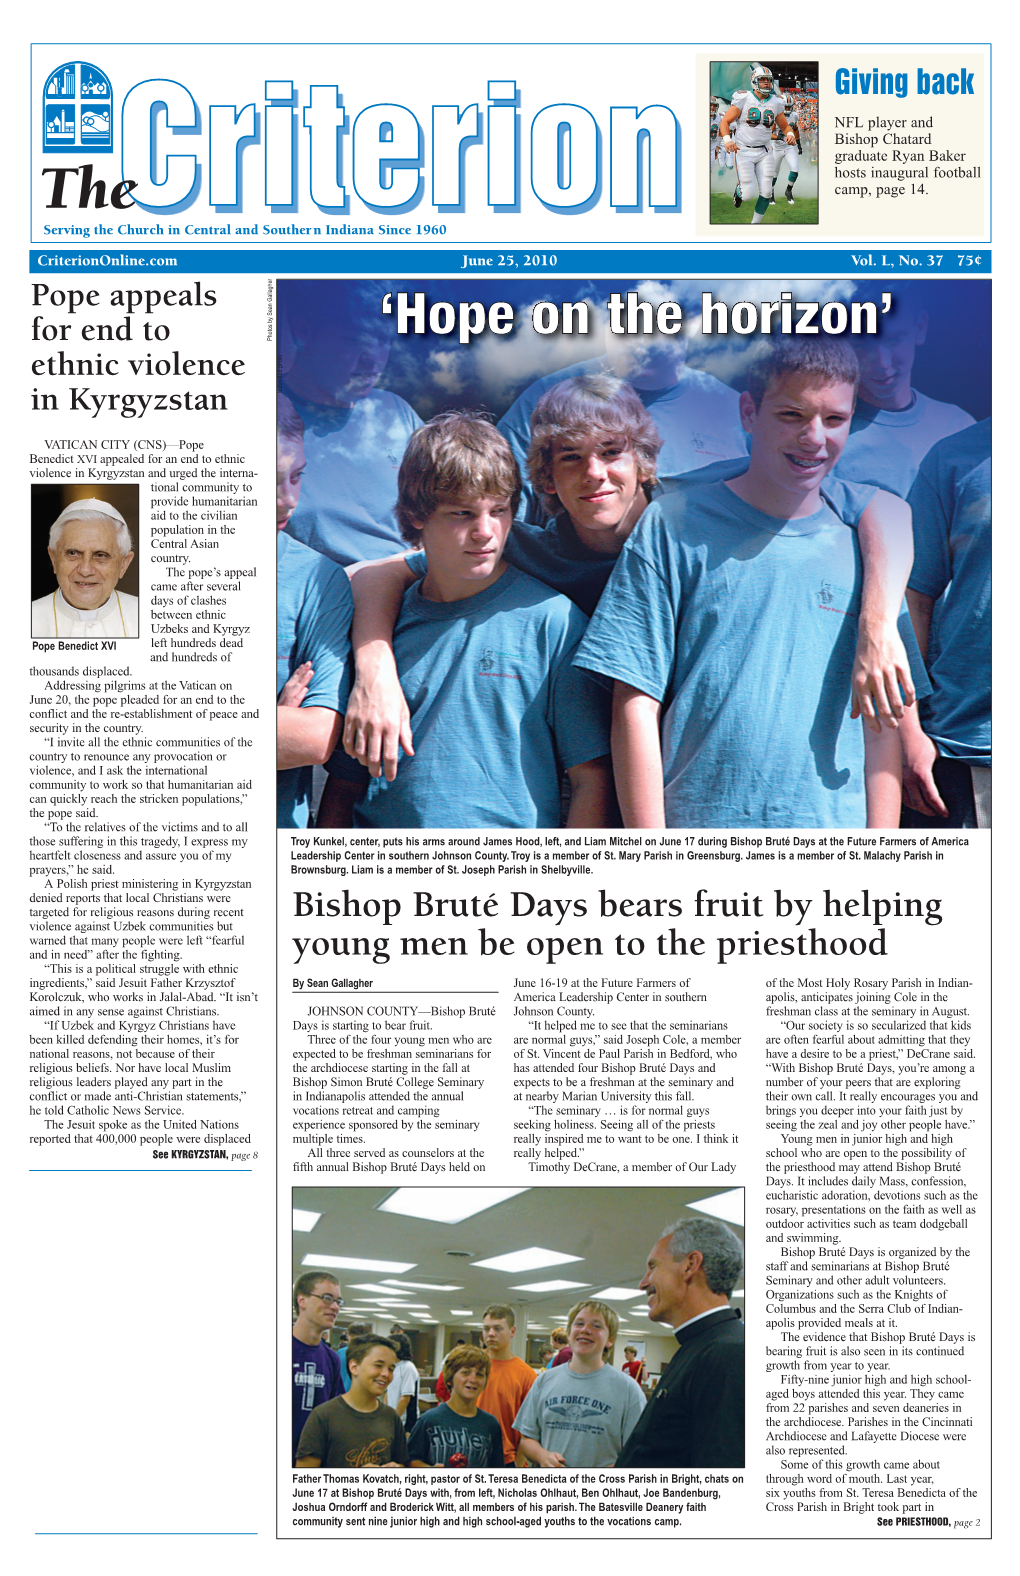 Bishop Bruté Days Bears Fruit by Helping Young Men Be Open to The